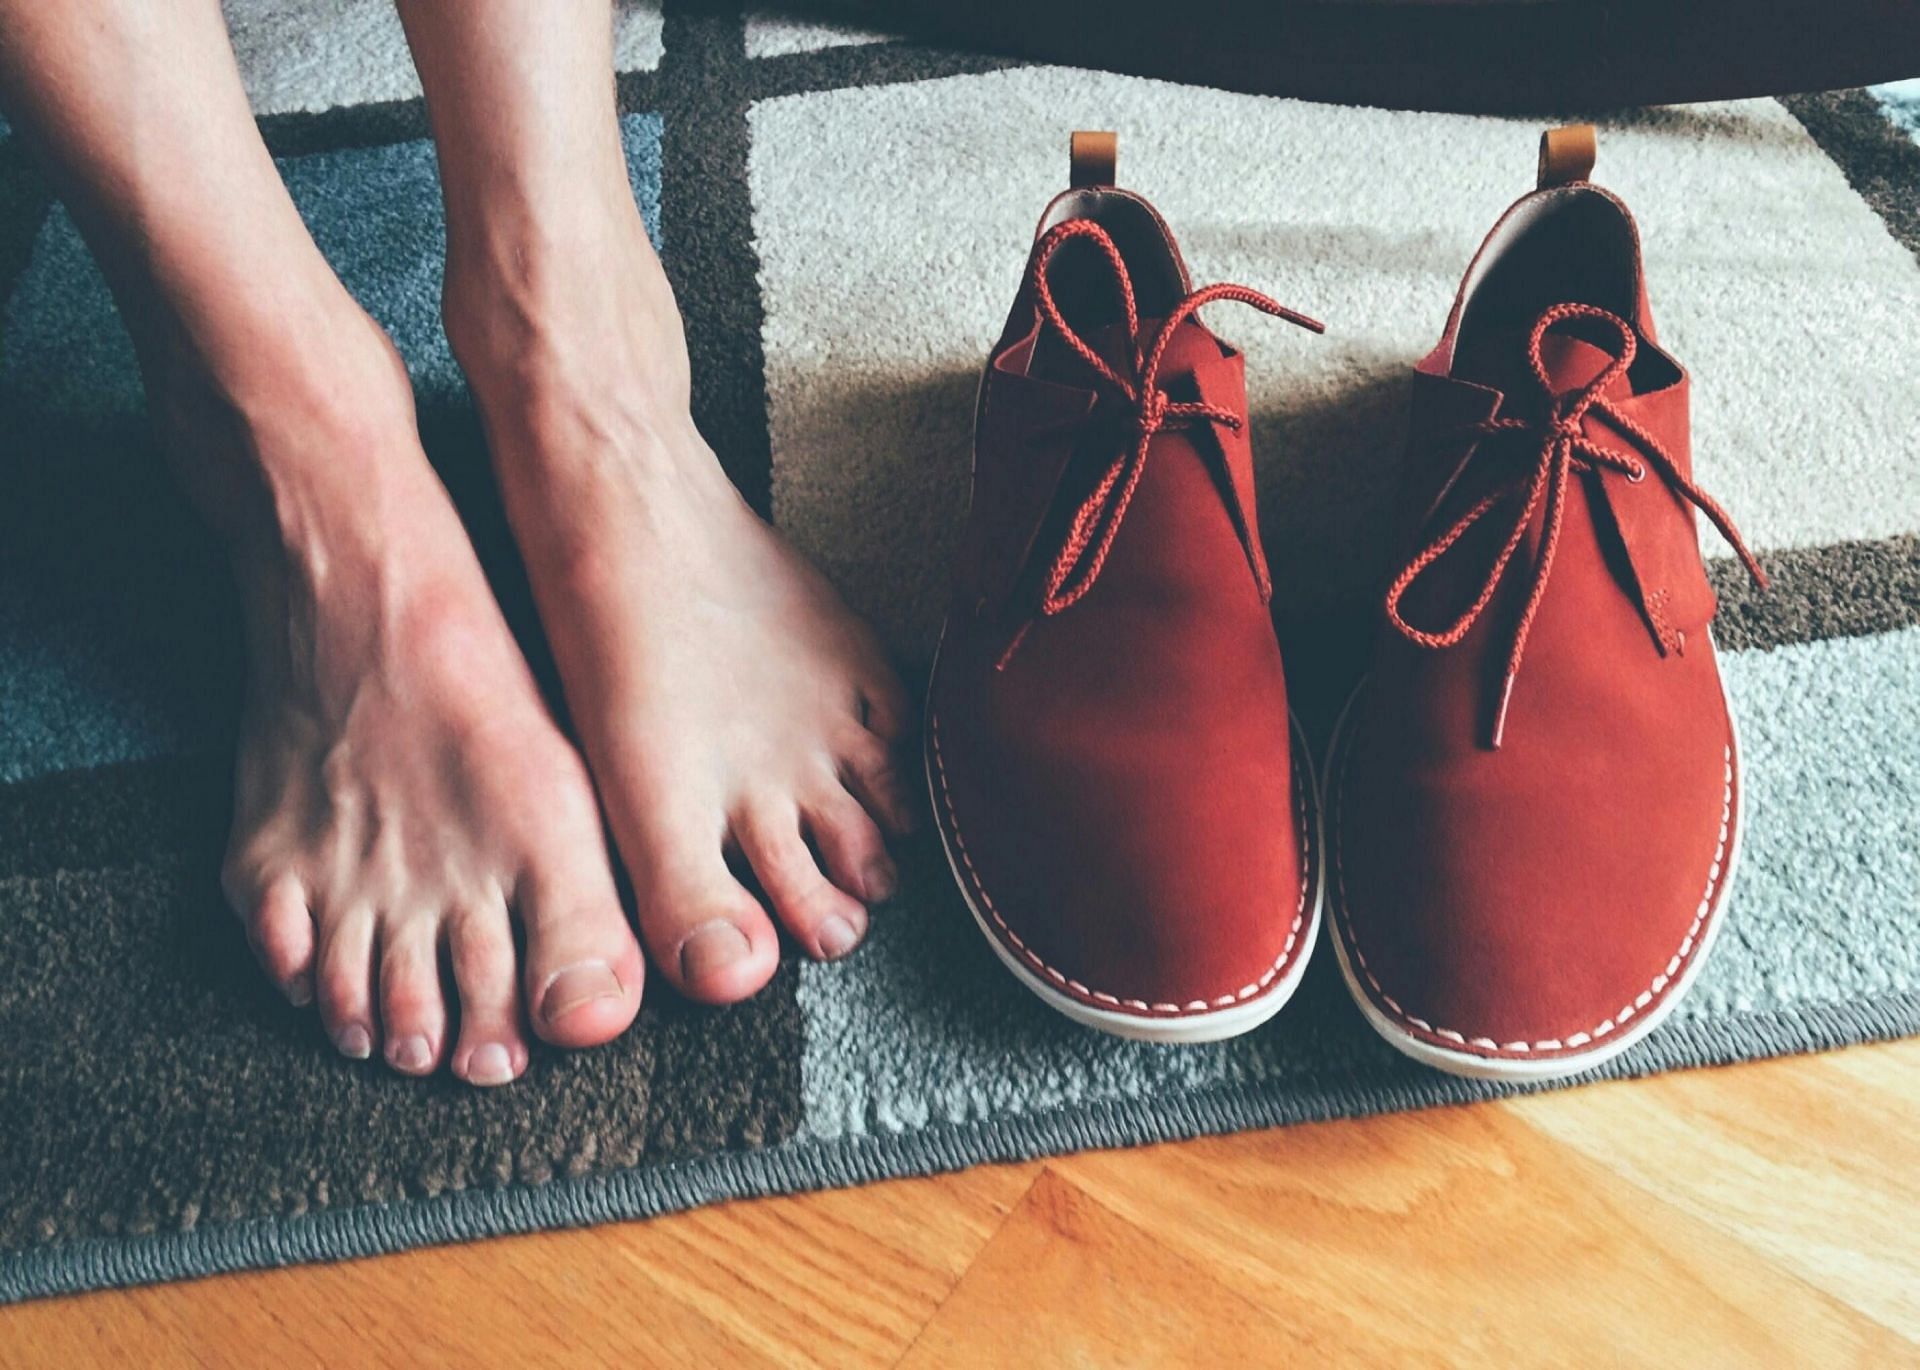 Ways to fix flat foot (image sourced via Pexels / Photo by pixabay)